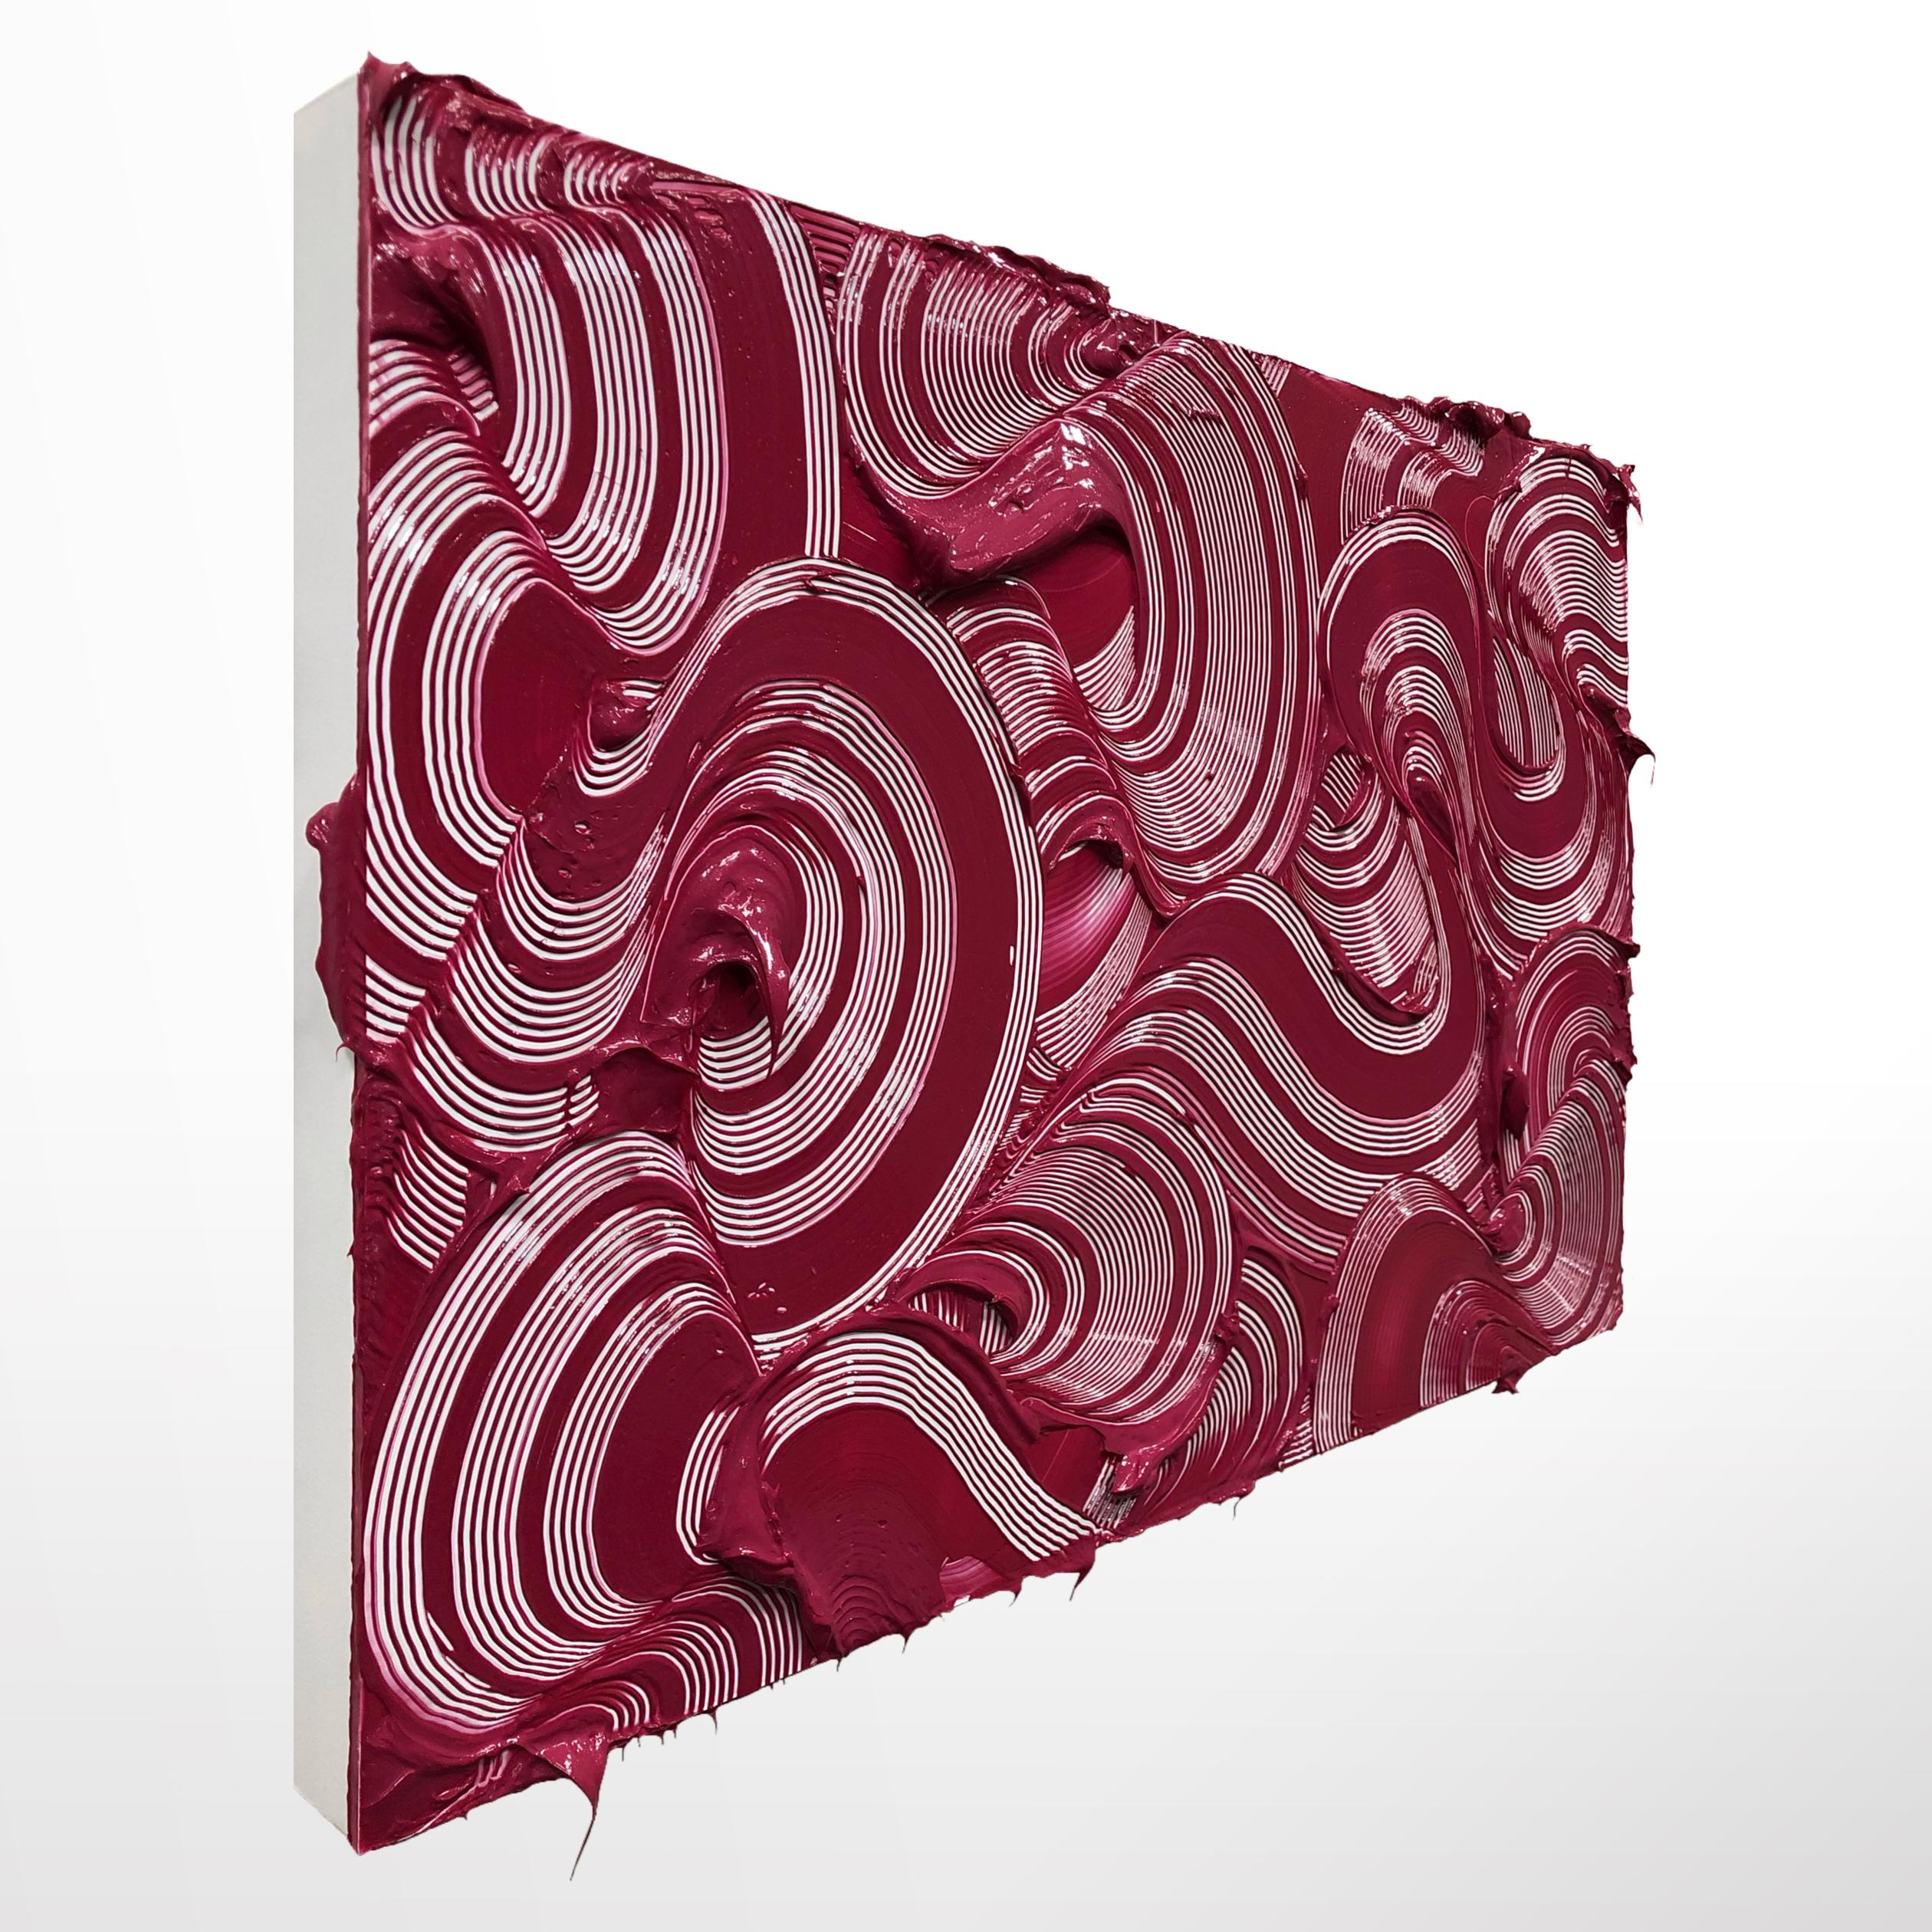 Splendid I - textured contemporary painting, magenta strokes, abstract - Sculpture by Tim Nikiforuk